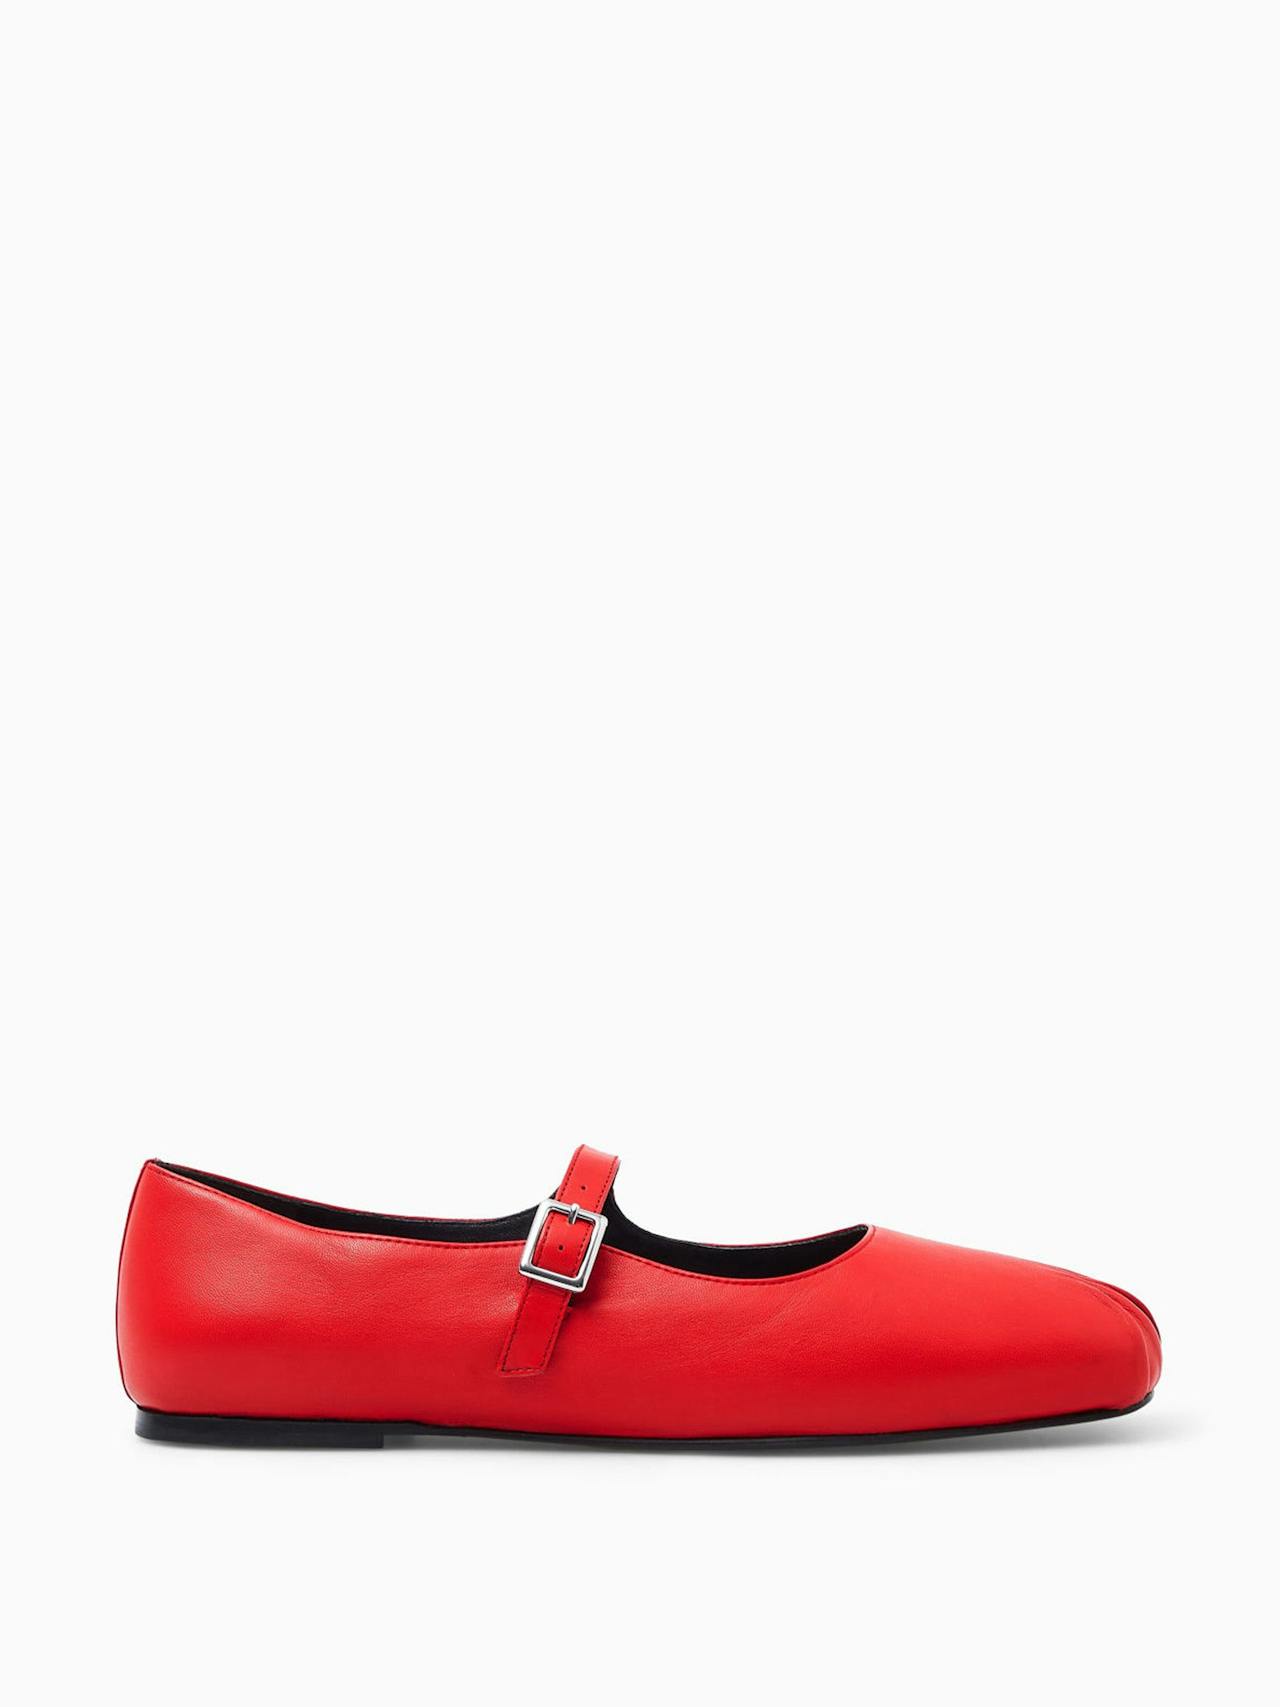 Pleated leather Mary-Jane ballet flats